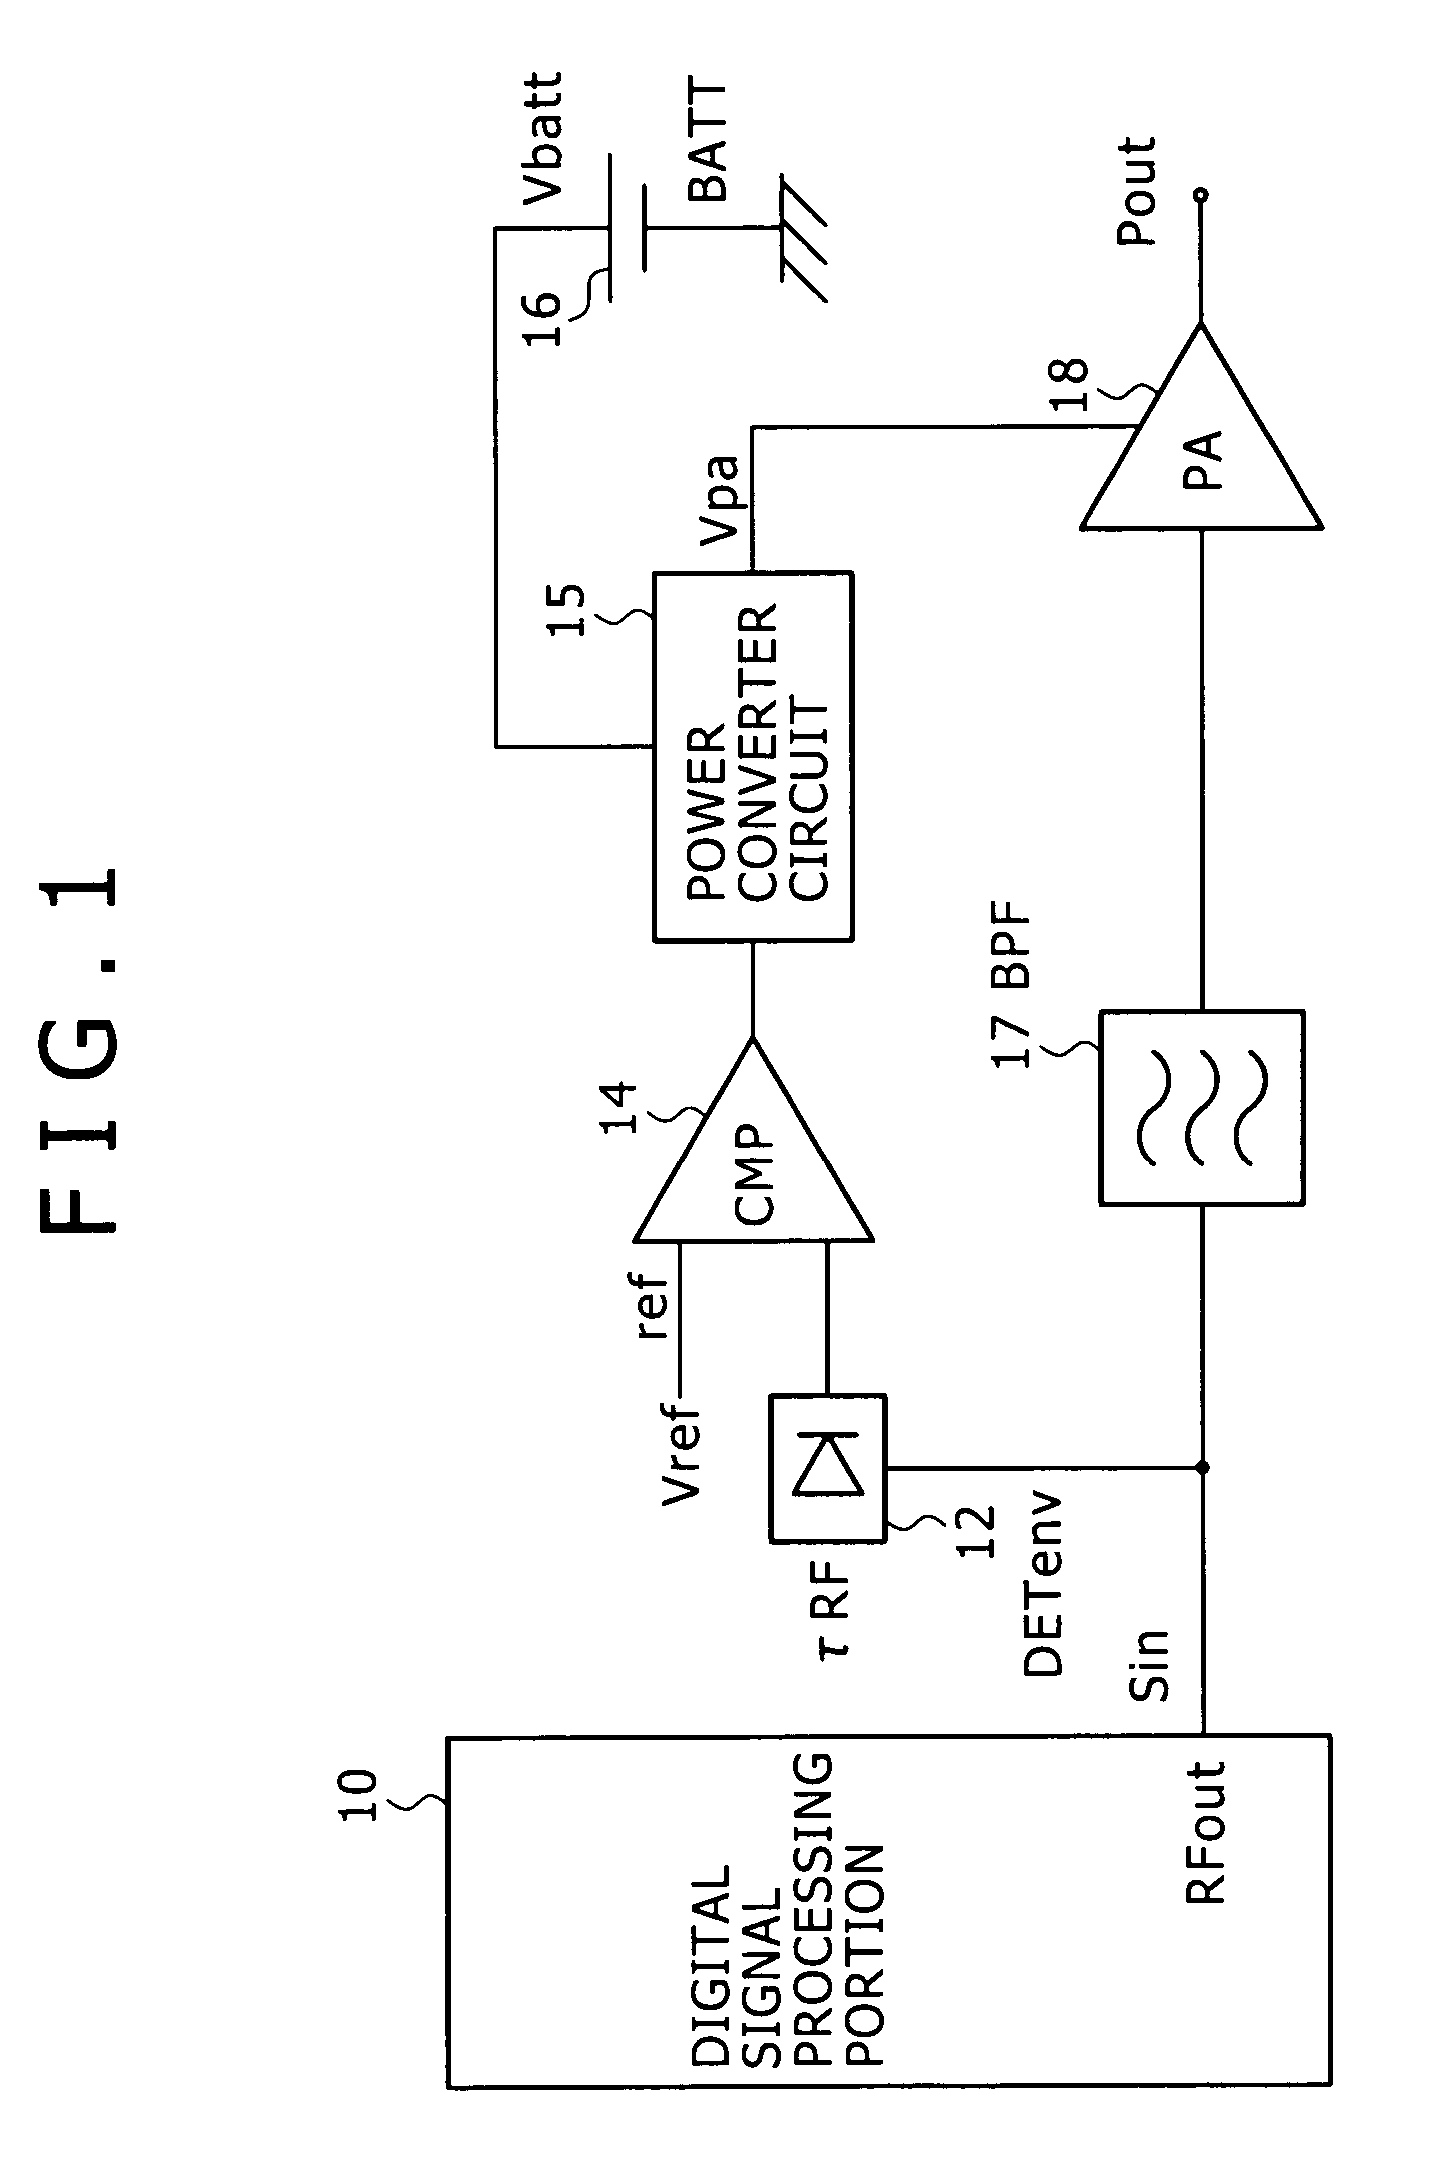 High frequency power amplifier and transmitter